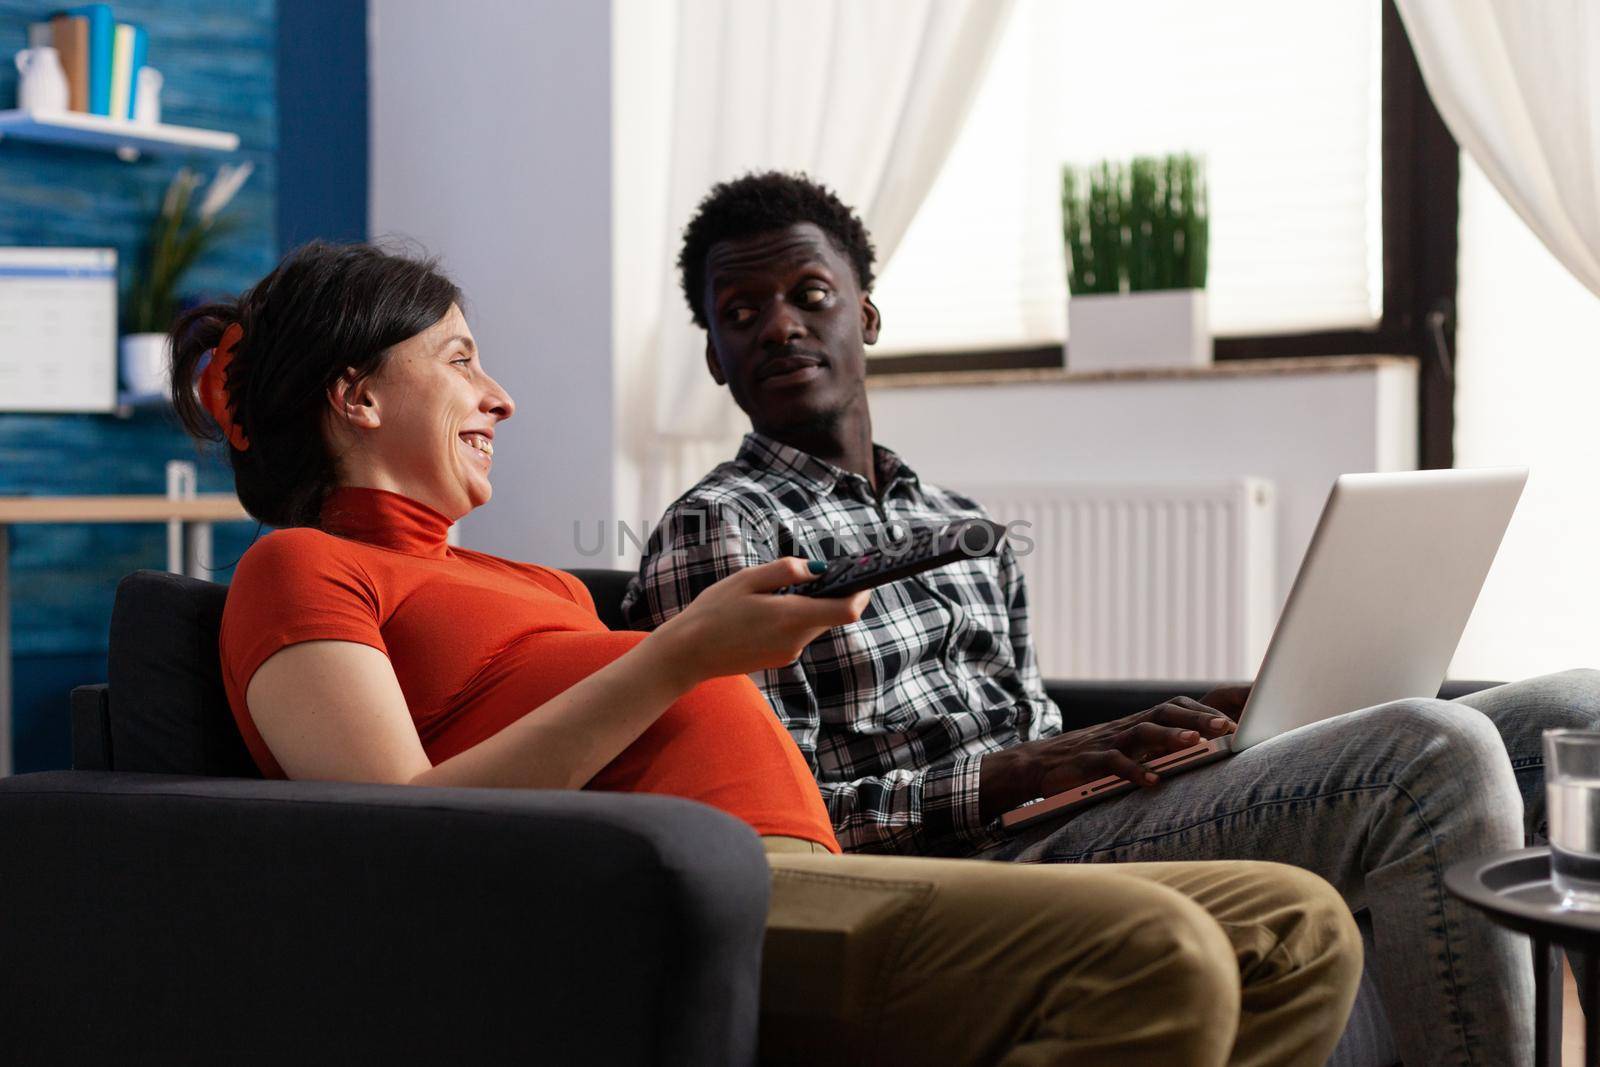 Interracial couple with pregnancy smiling and relaxing at home. Caucasian woman with baby bump holding remote control for television and african american father of child using laptop